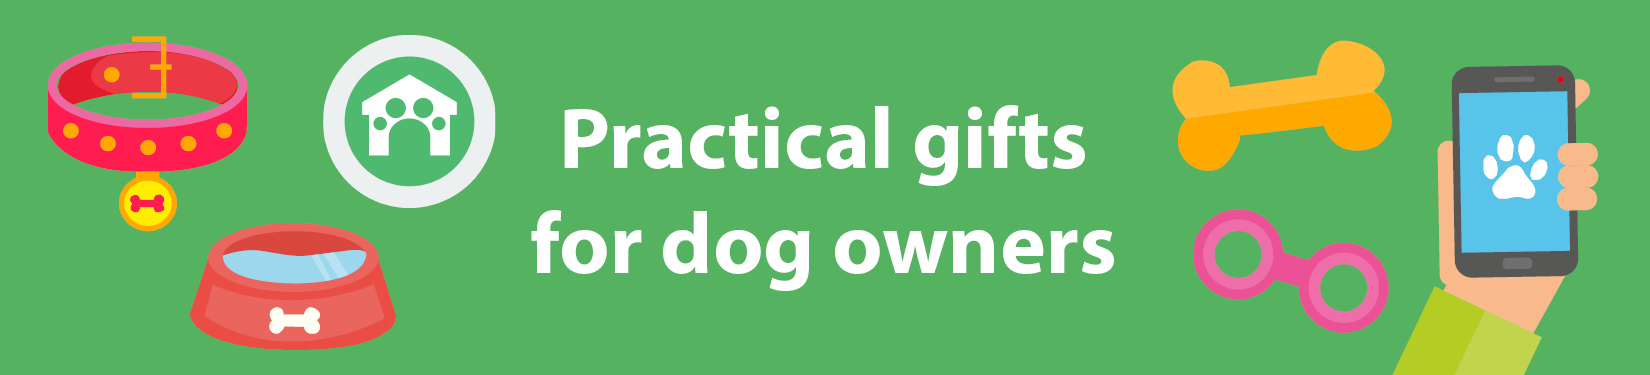 Practical gifts for dog owners header image